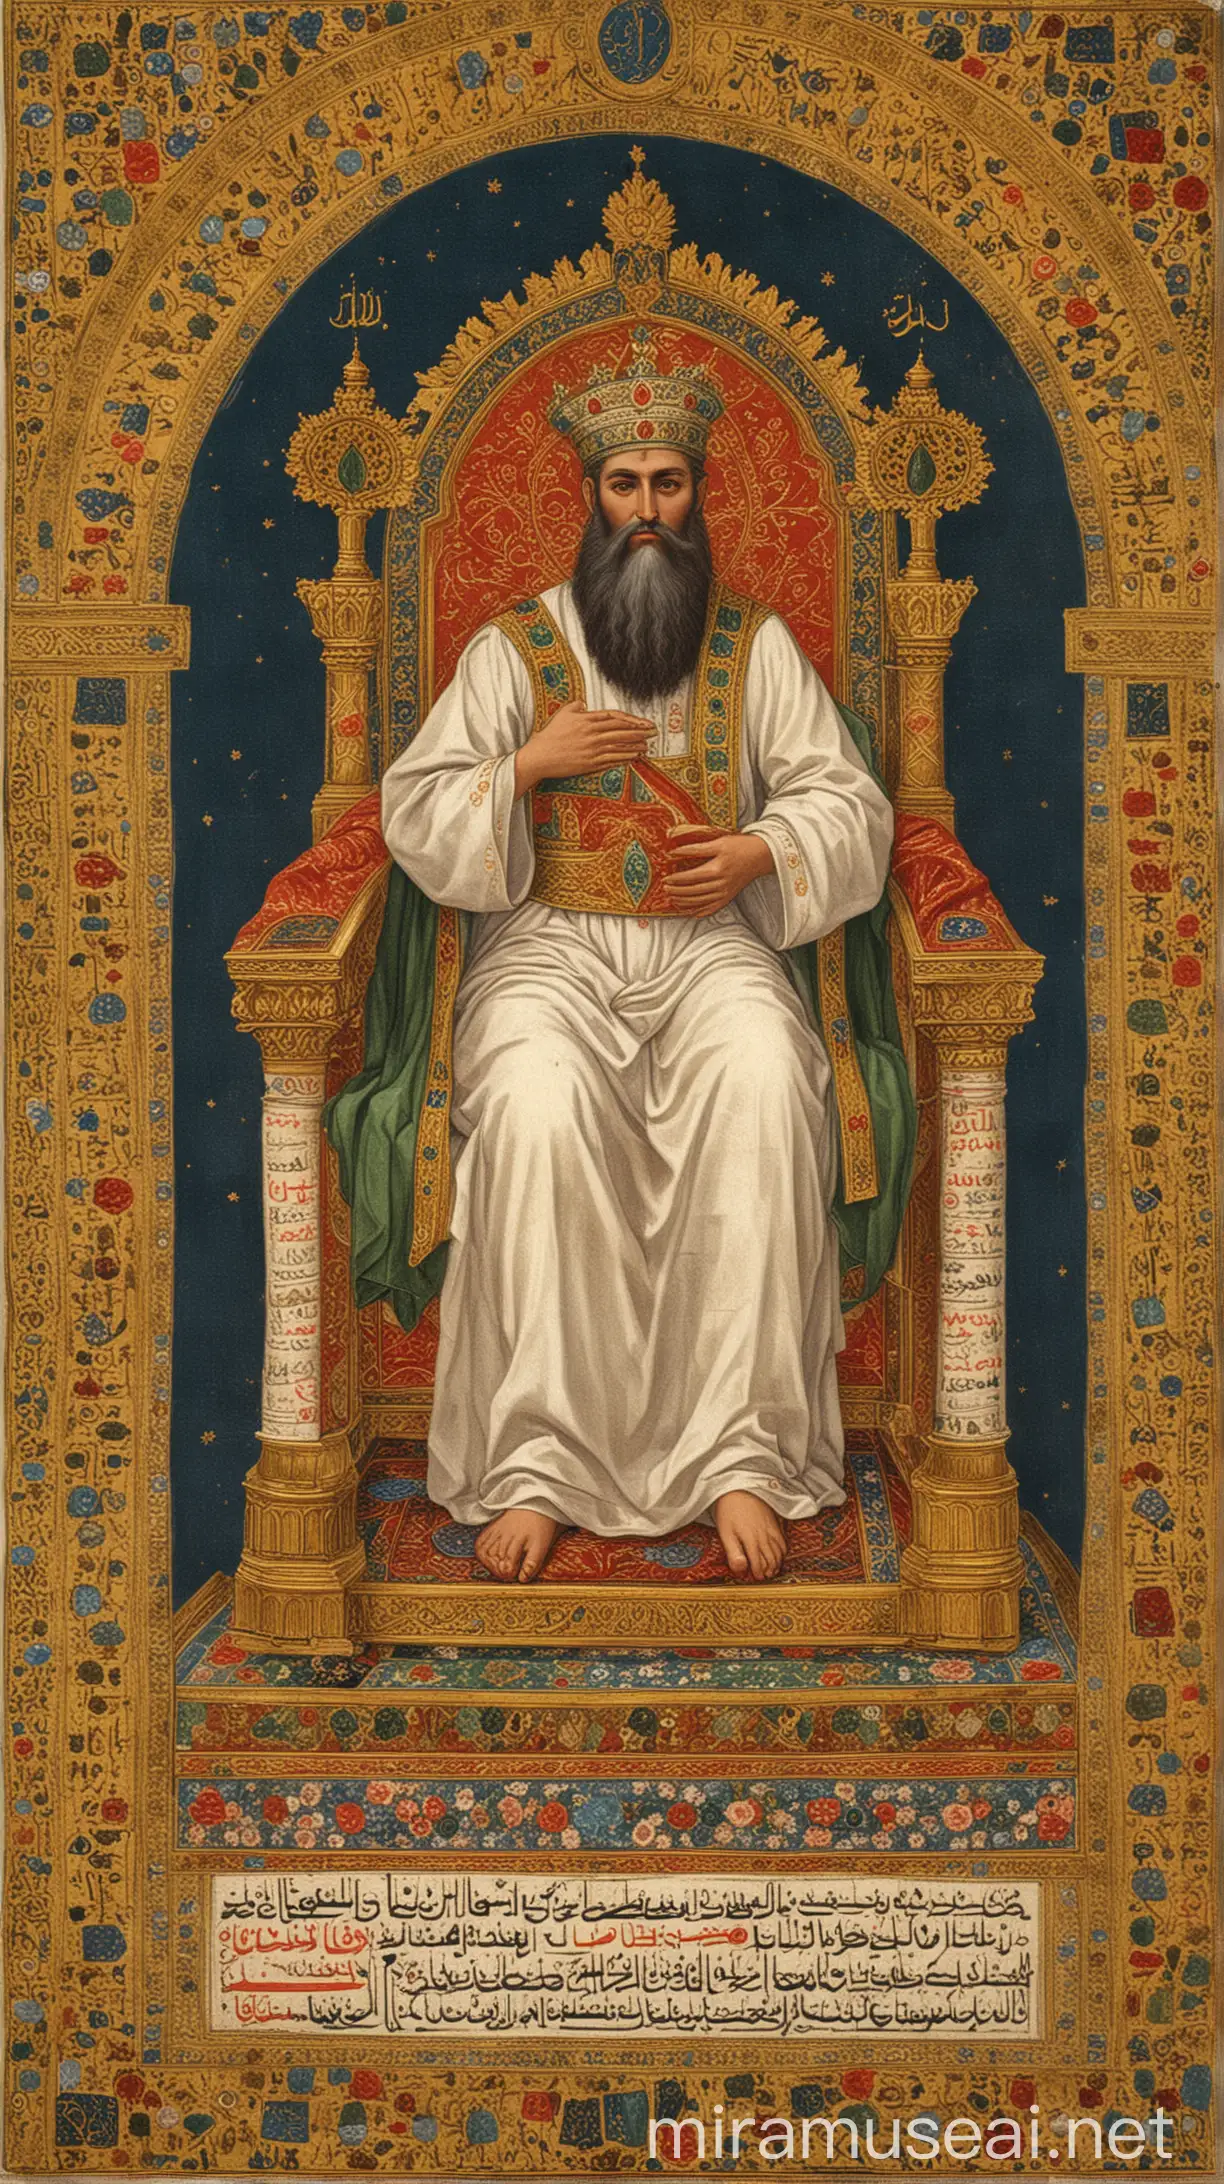 Prophet Solomon Seated on His Divine Throne in Royal Garments